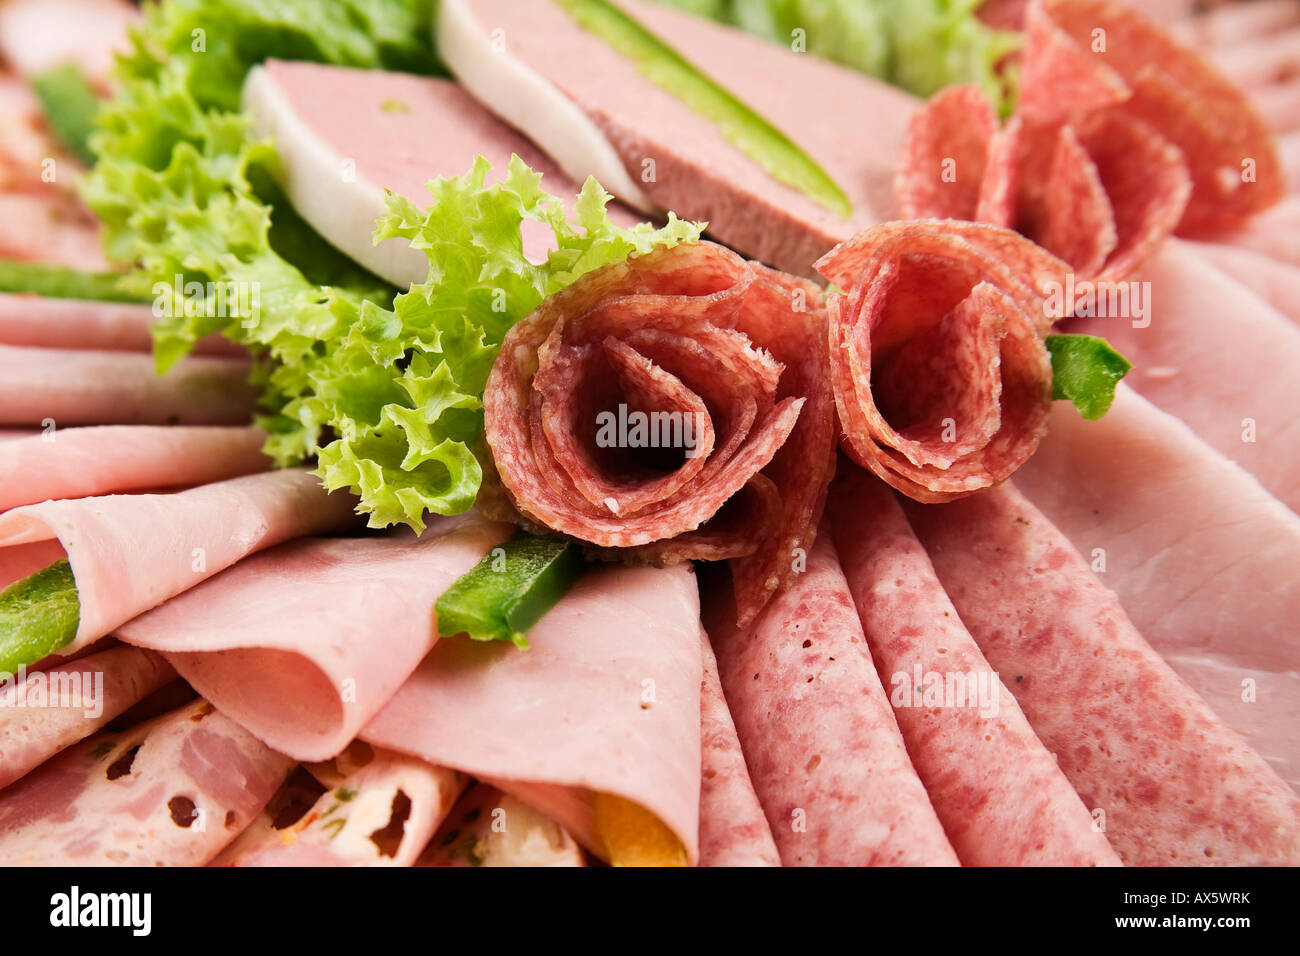 Luncheon meat platter, cold cuts Stock Photo